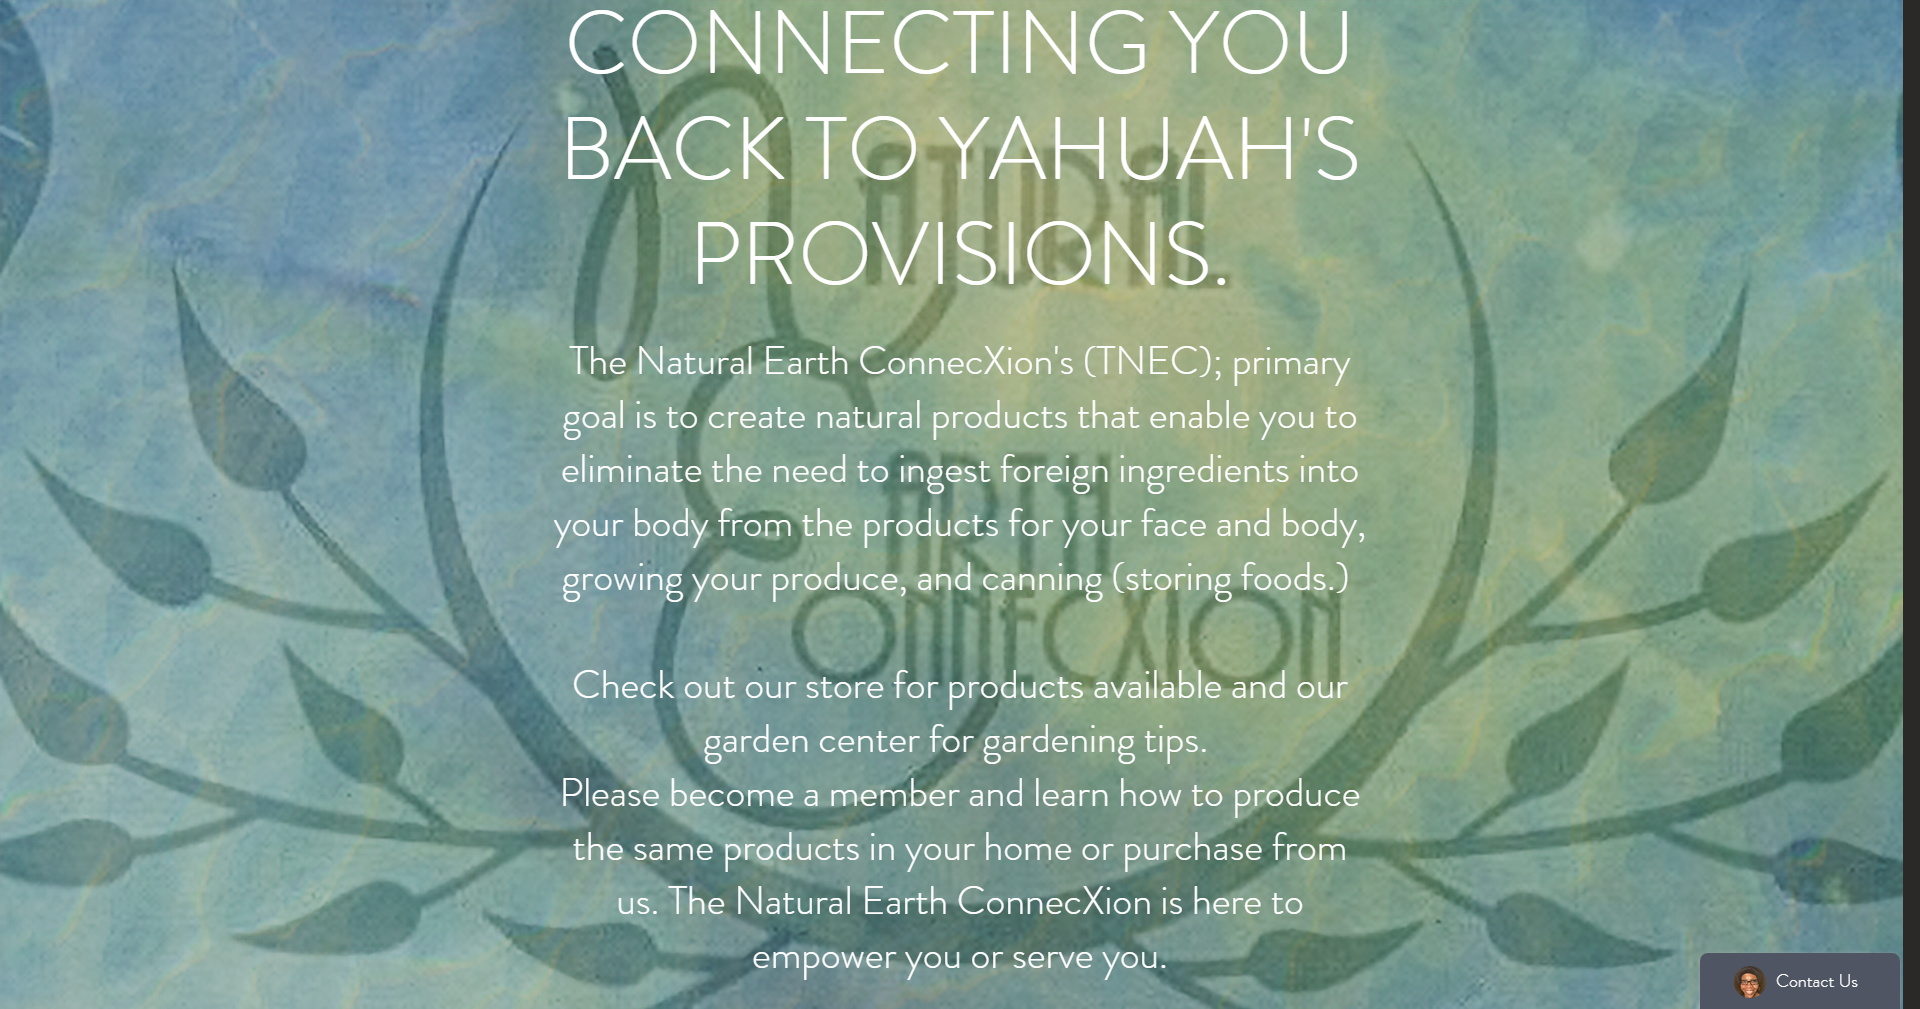 The Natural Earth ConnecXion – Connecting you back to Yahuah’s provisions with natural products – Yahudah Living DIrectory Listing